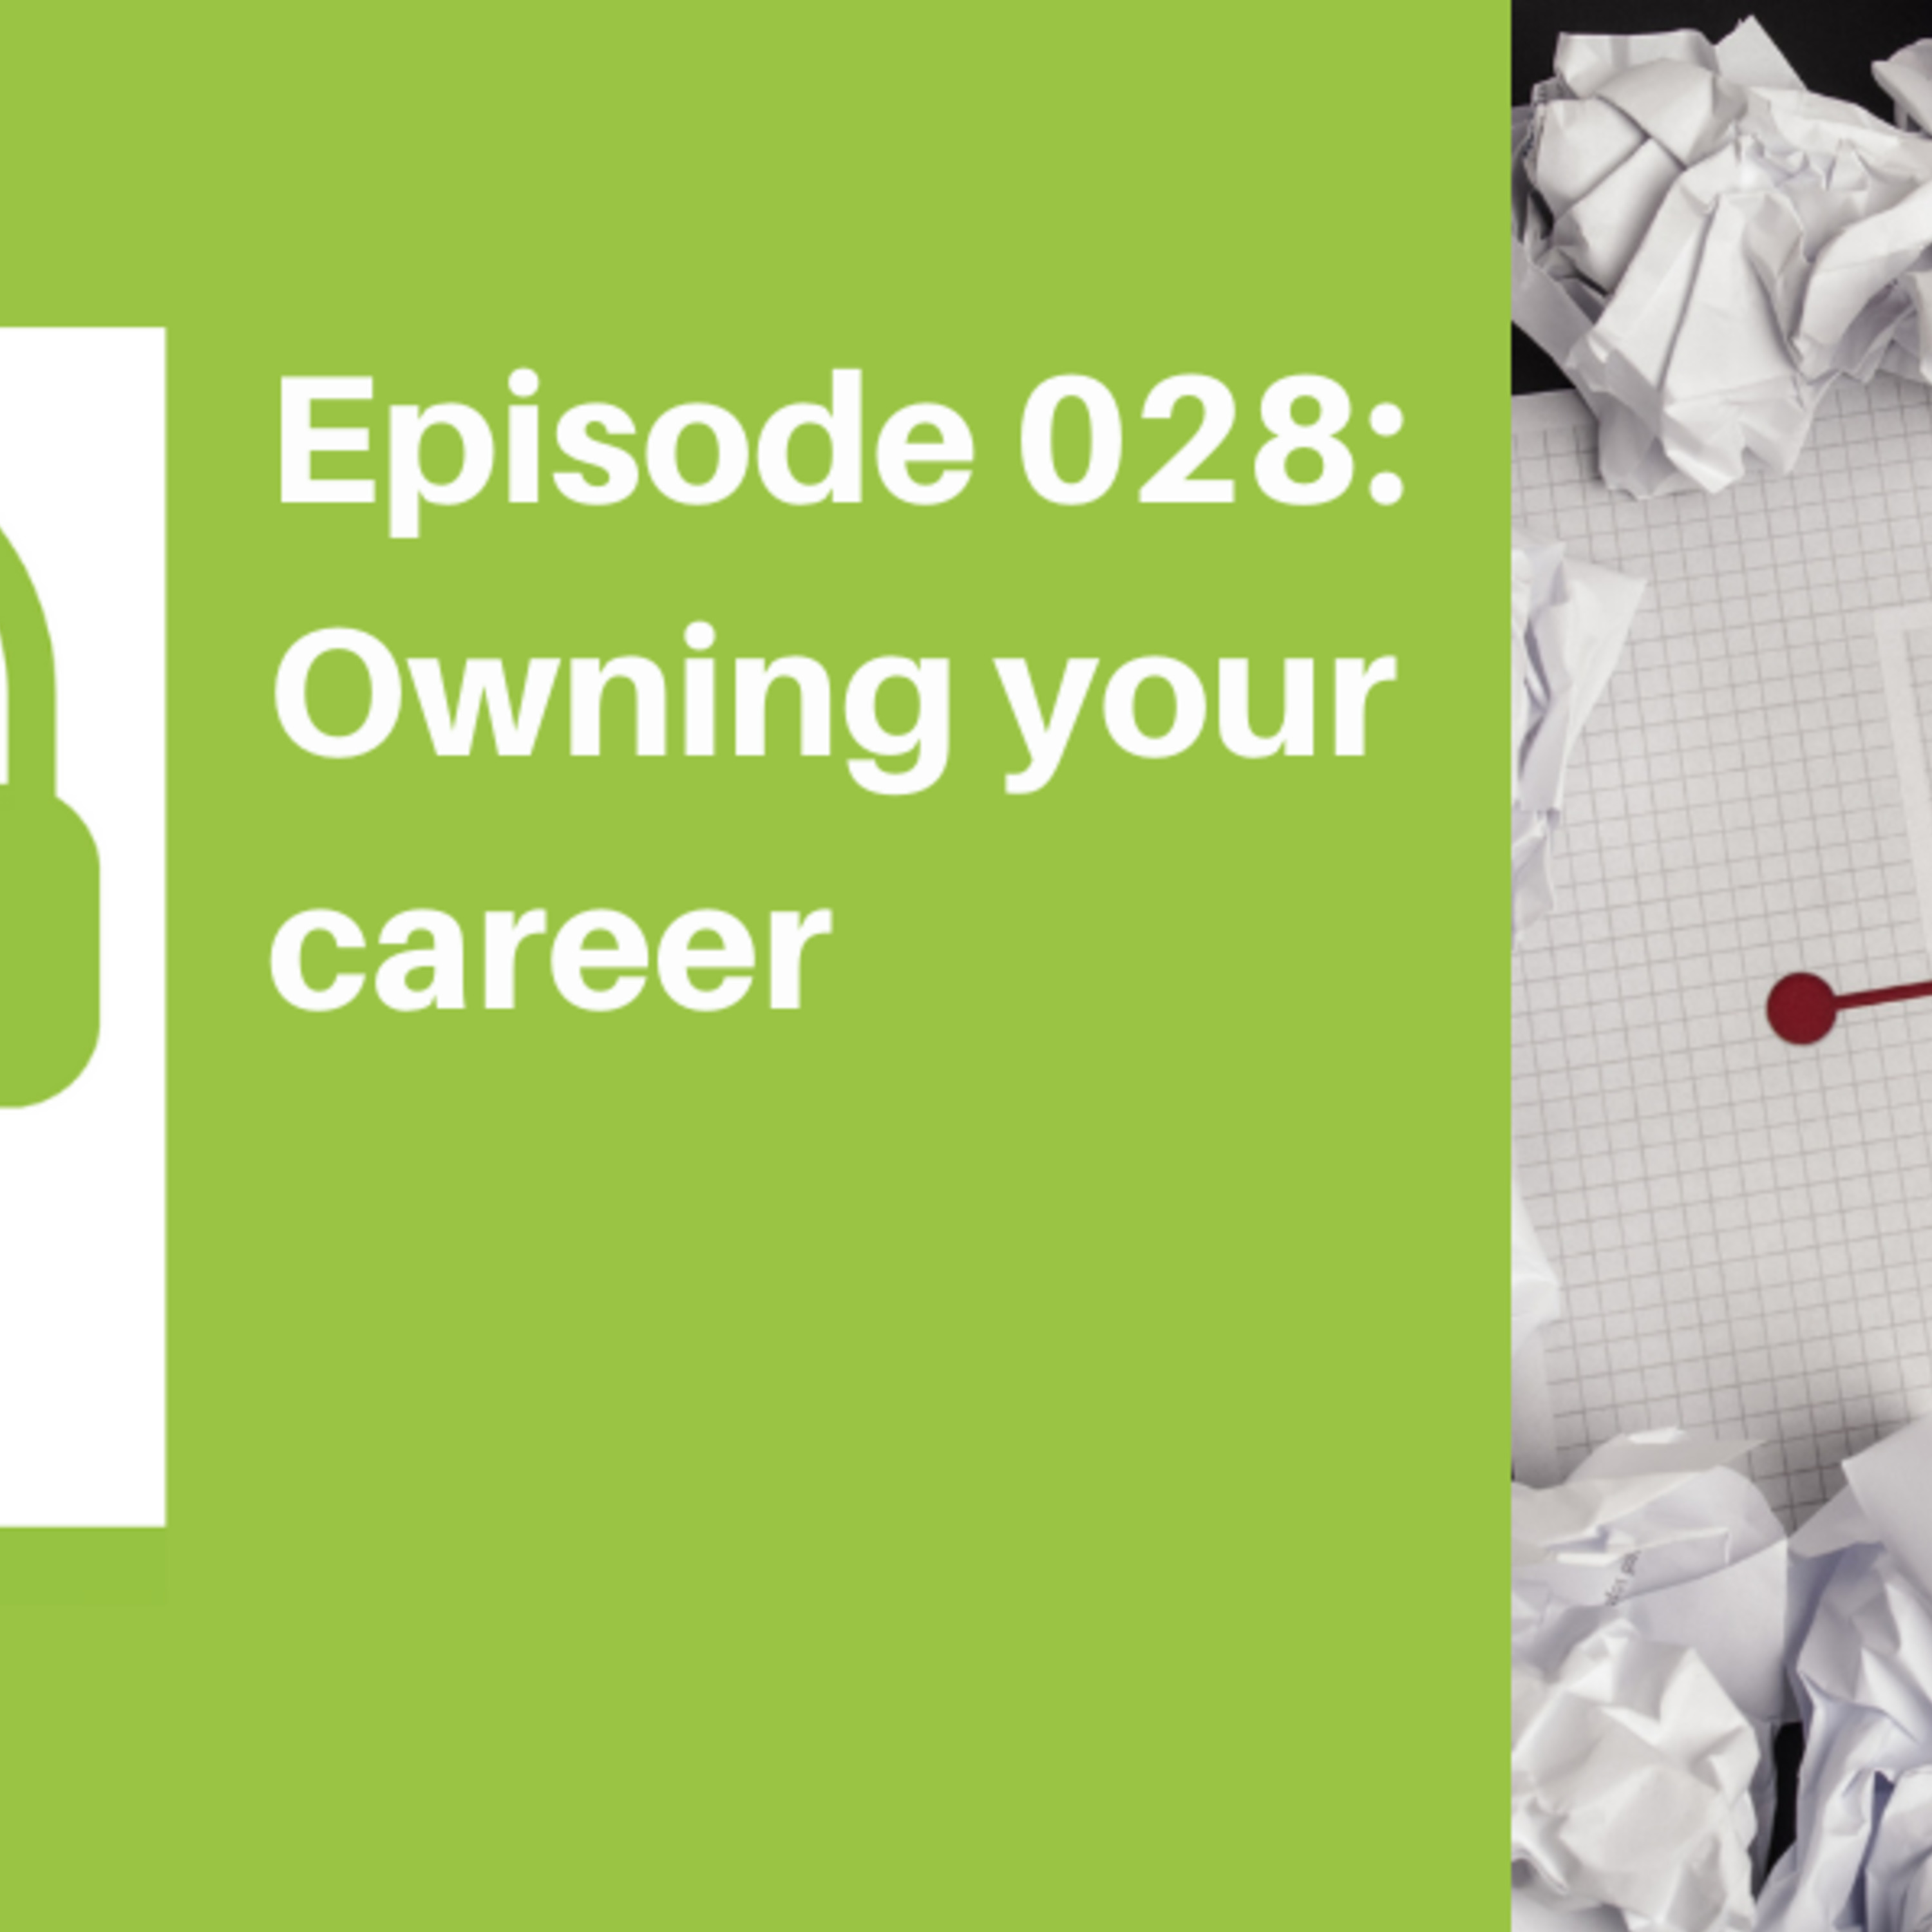 Episode 028: Owning your career [CAREER]